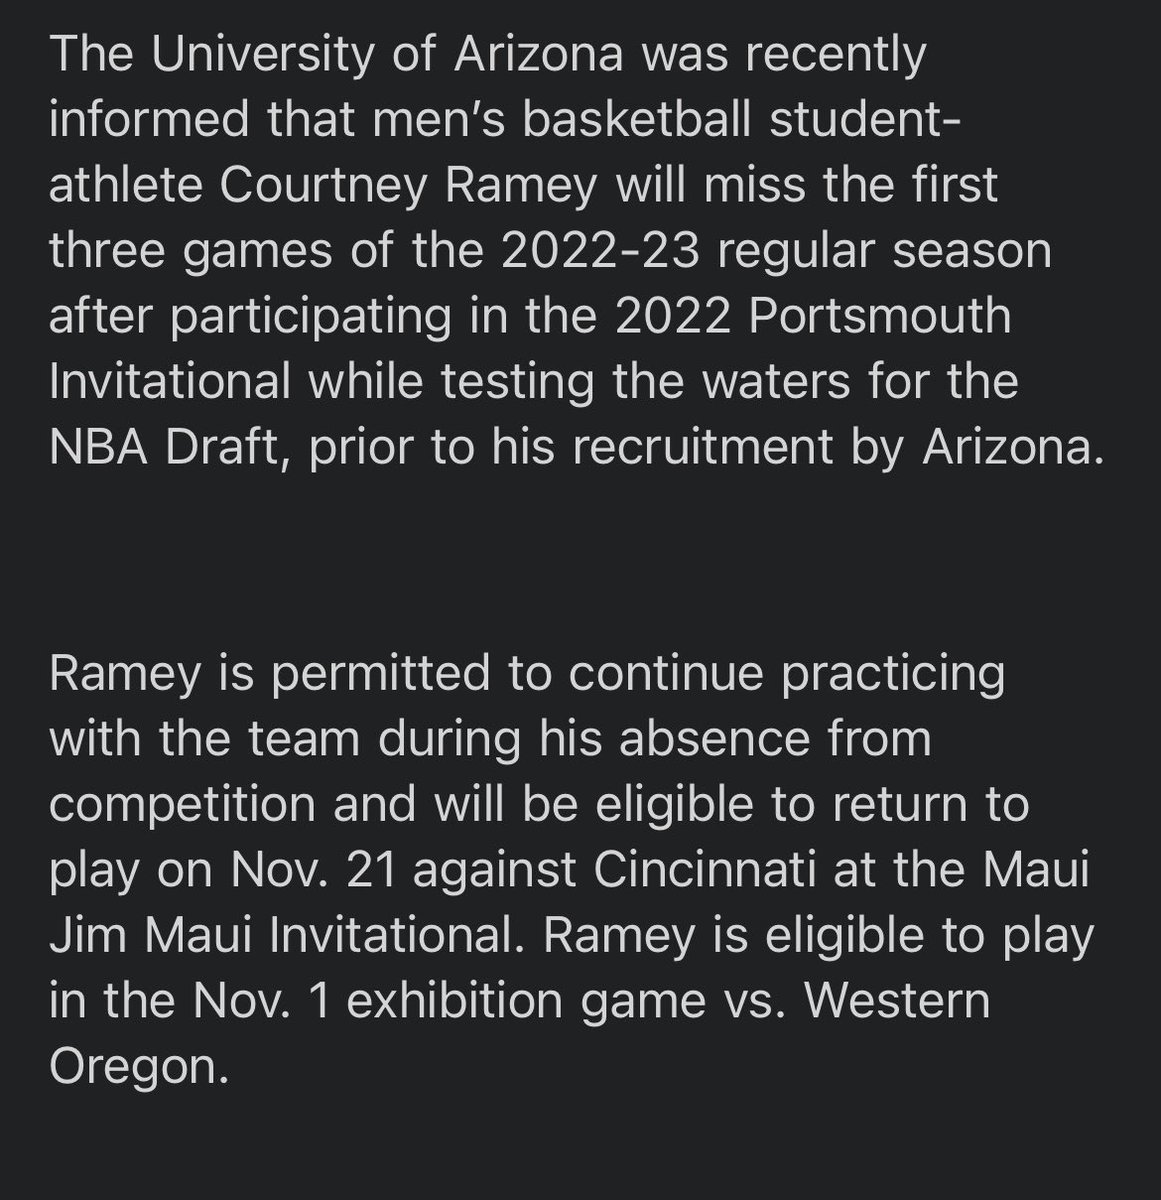 Arizona’s official statement on Courtney Ramey and his 3-game suspension.